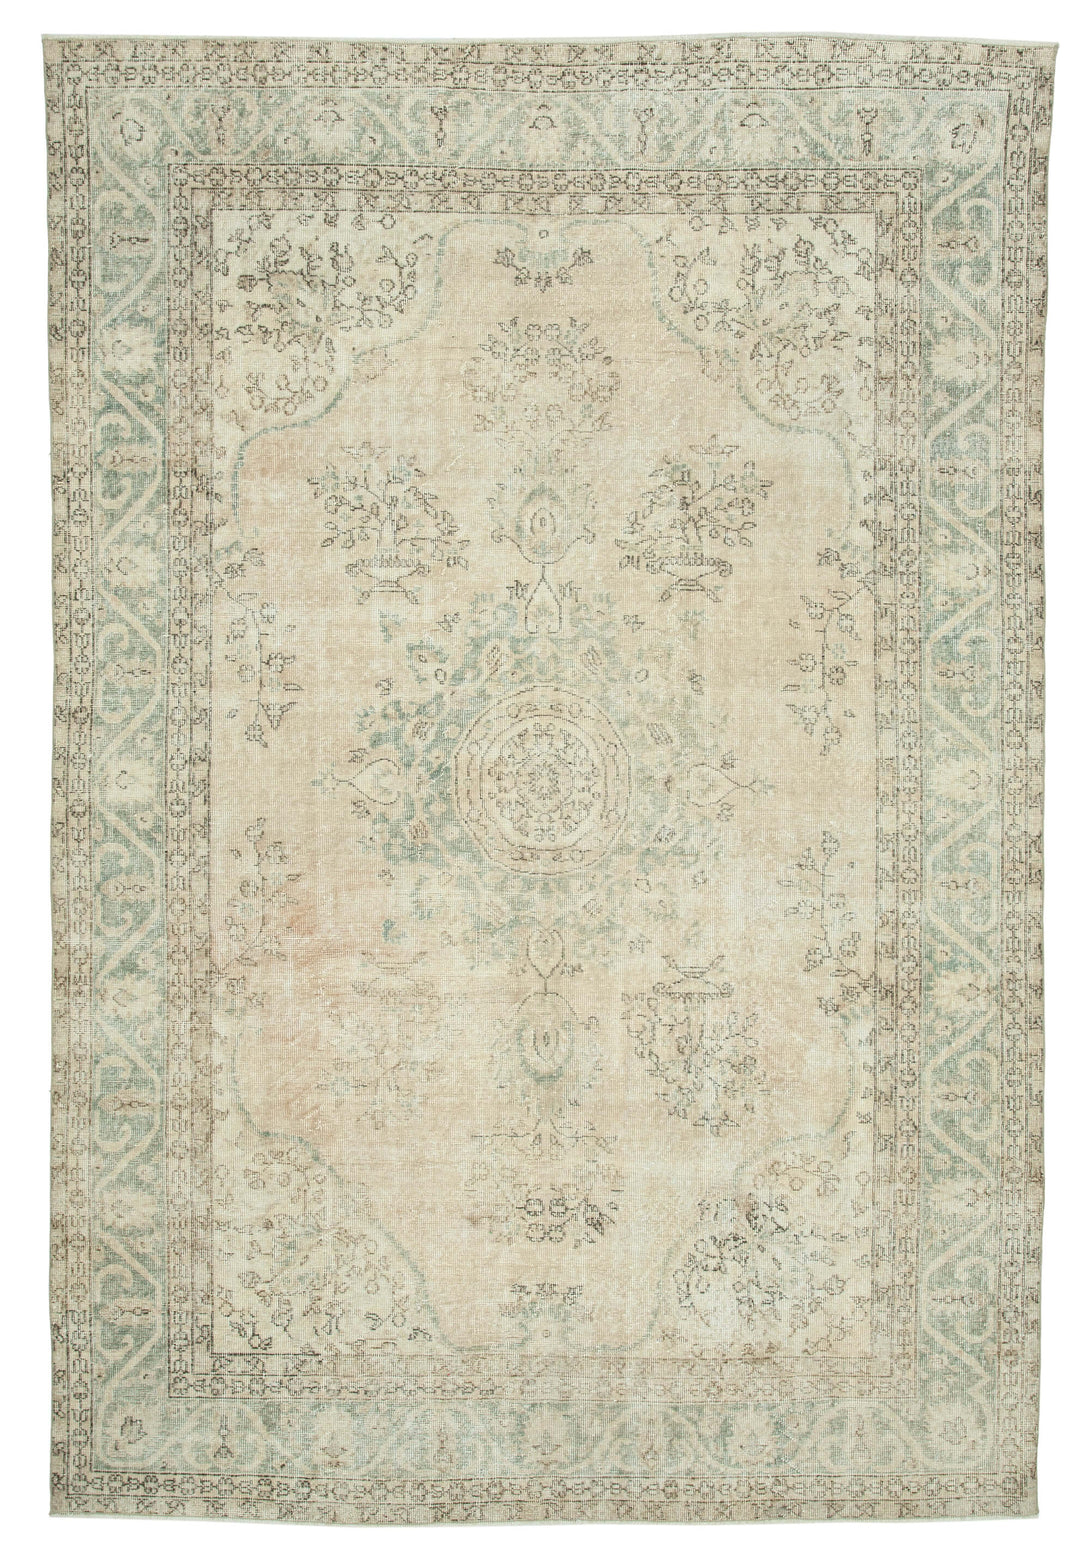 Handmade White Wash Area Rug > Design# OL-AC-34109 > Size: 7'-0" x 10'-5", Carpet Culture Rugs, Handmade Rugs, NYC Rugs, New Rugs, Shop Rugs, Rug Store, Outlet Rugs, SoHo Rugs, Rugs in USA